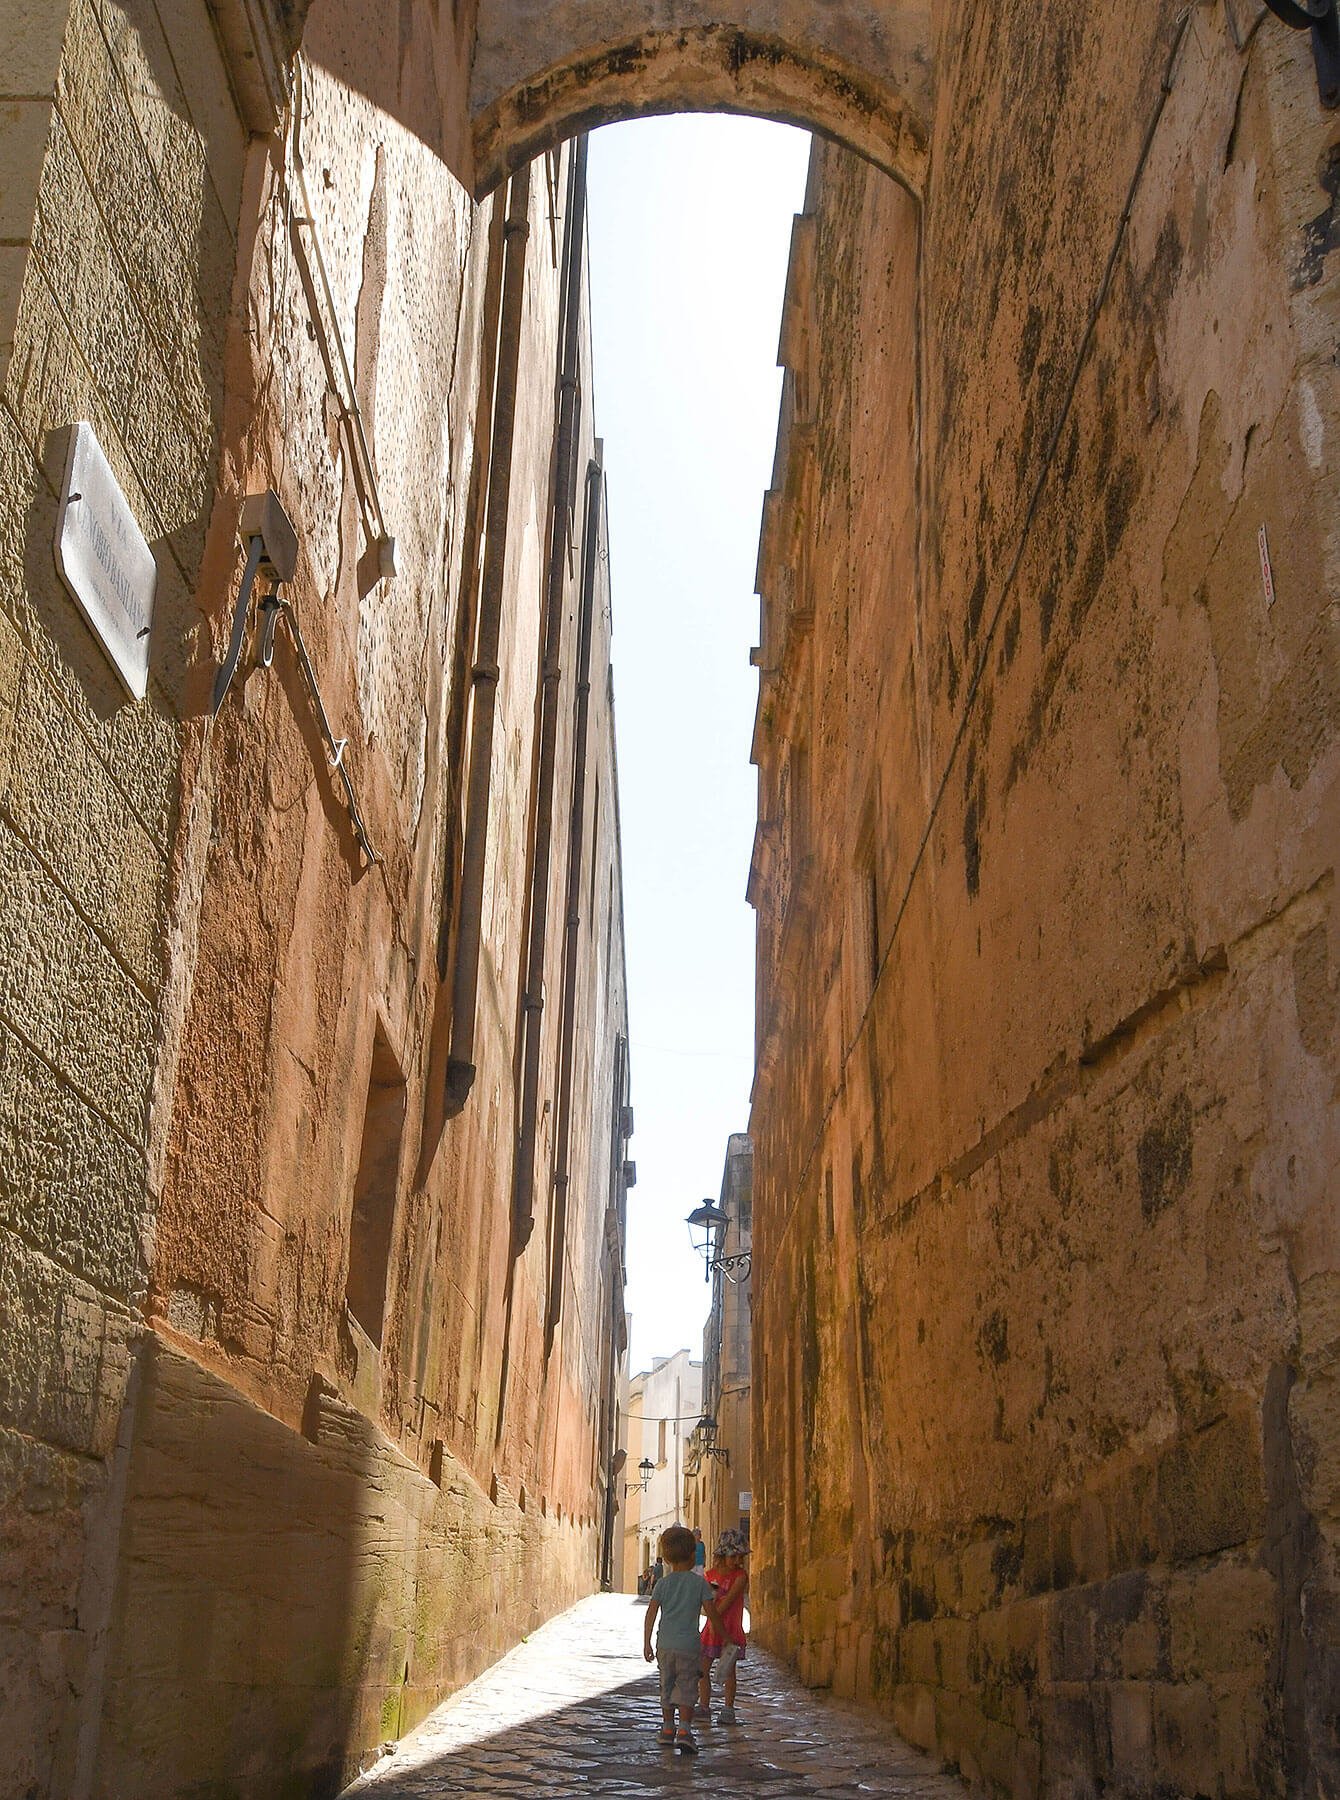 Narrowed Alley within Otranto's Old Town